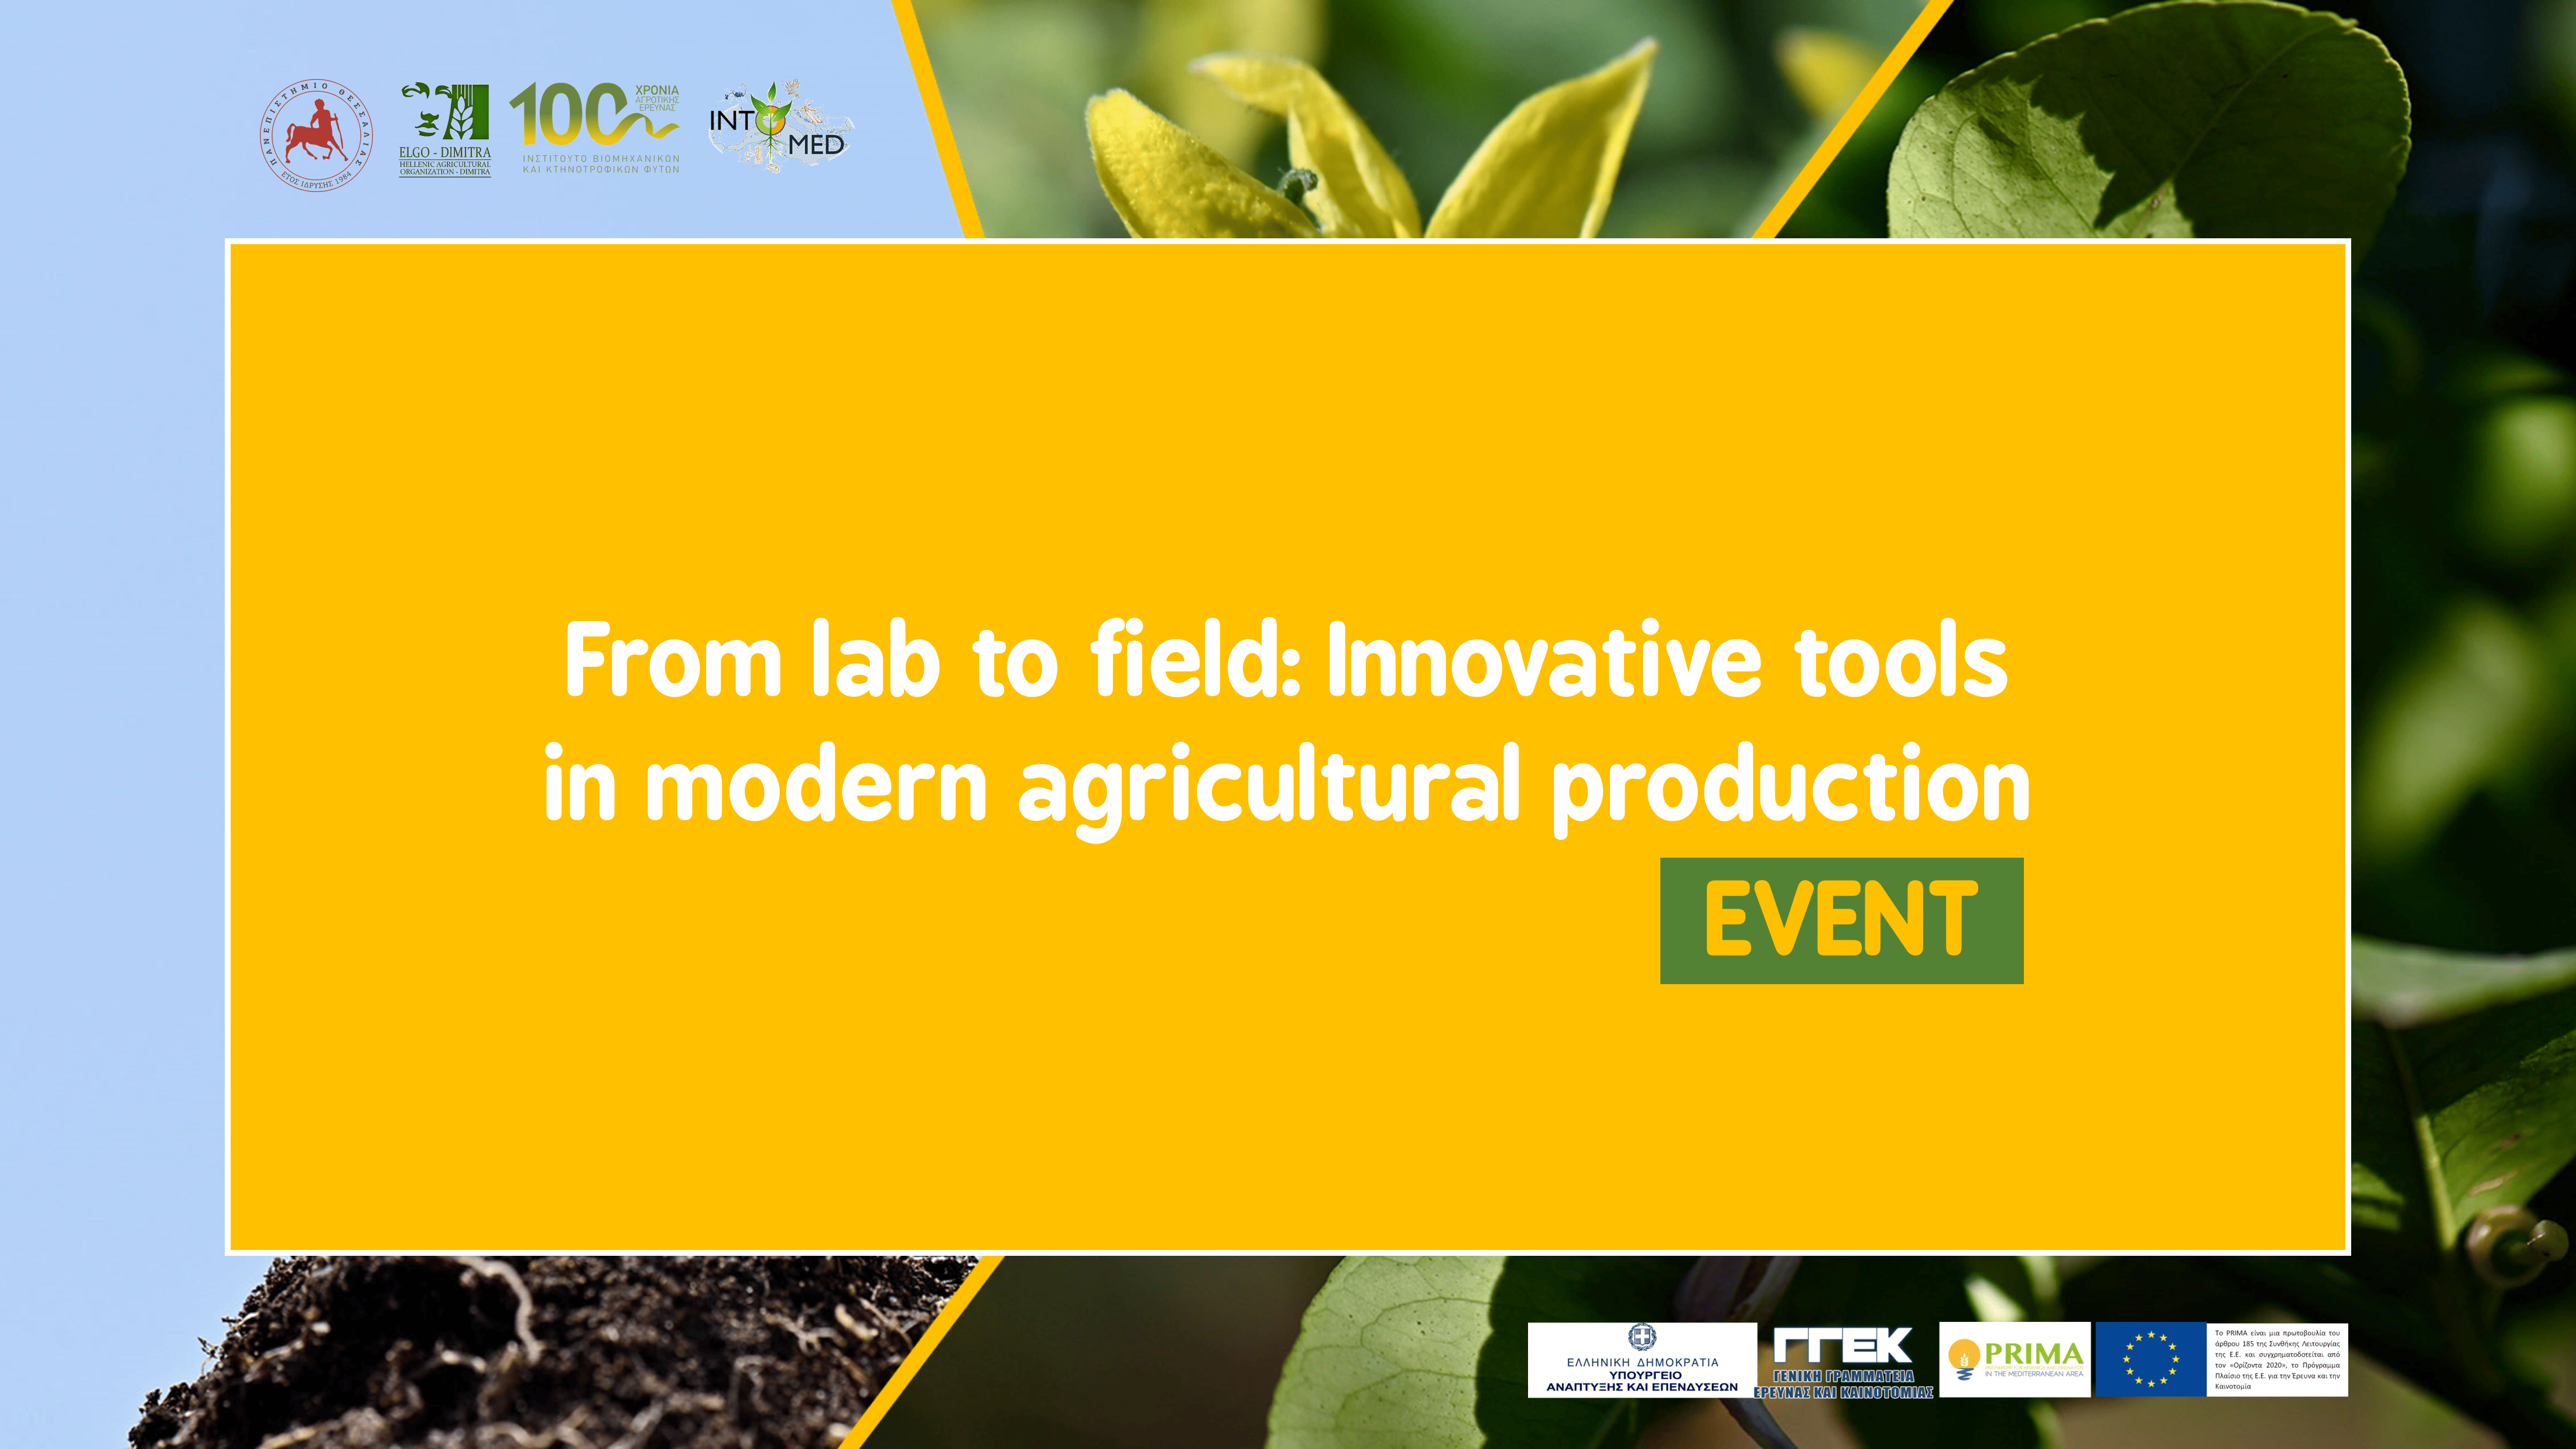 ‘From lab to field: Innovative tools in modern agricultural production’ Event